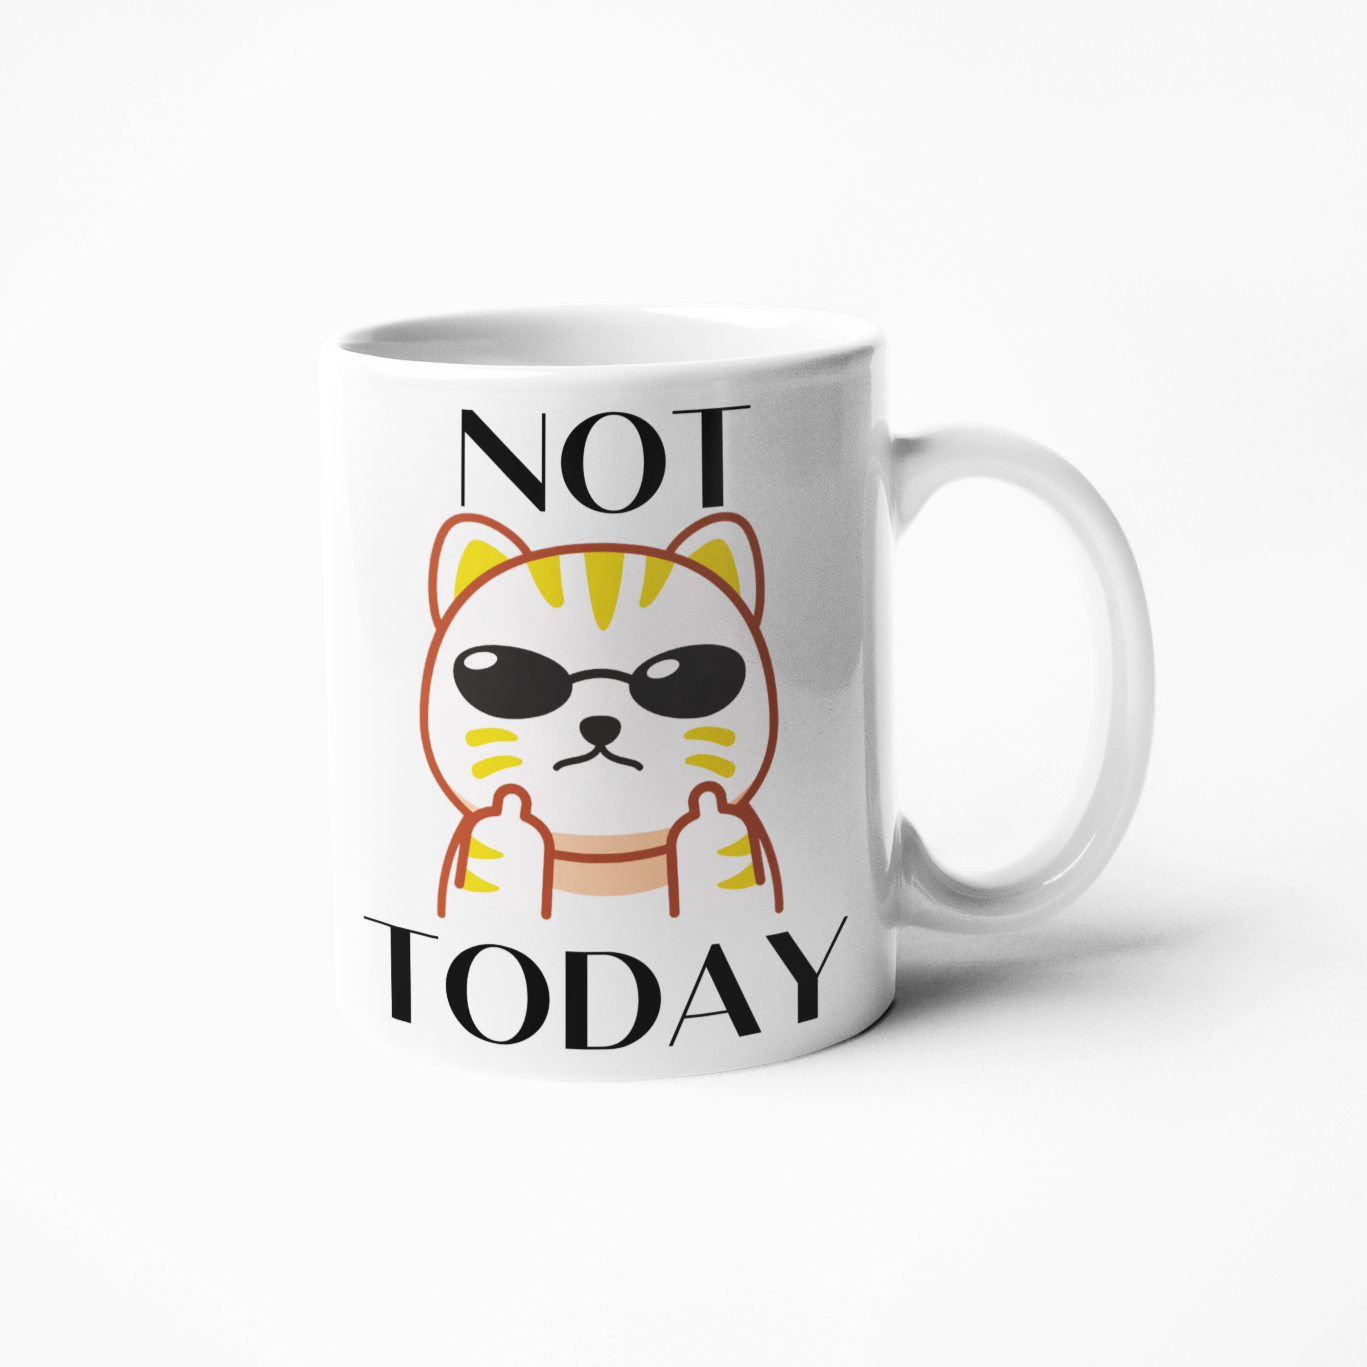 Start your morning with a motivational jolt! This Not Today Cat mug will inspire you to seize the day and take on any challenge. Let it also remind you to enjoy the journey along the way. Be bold and no matter what, don't give up! Make every cup of joe count!